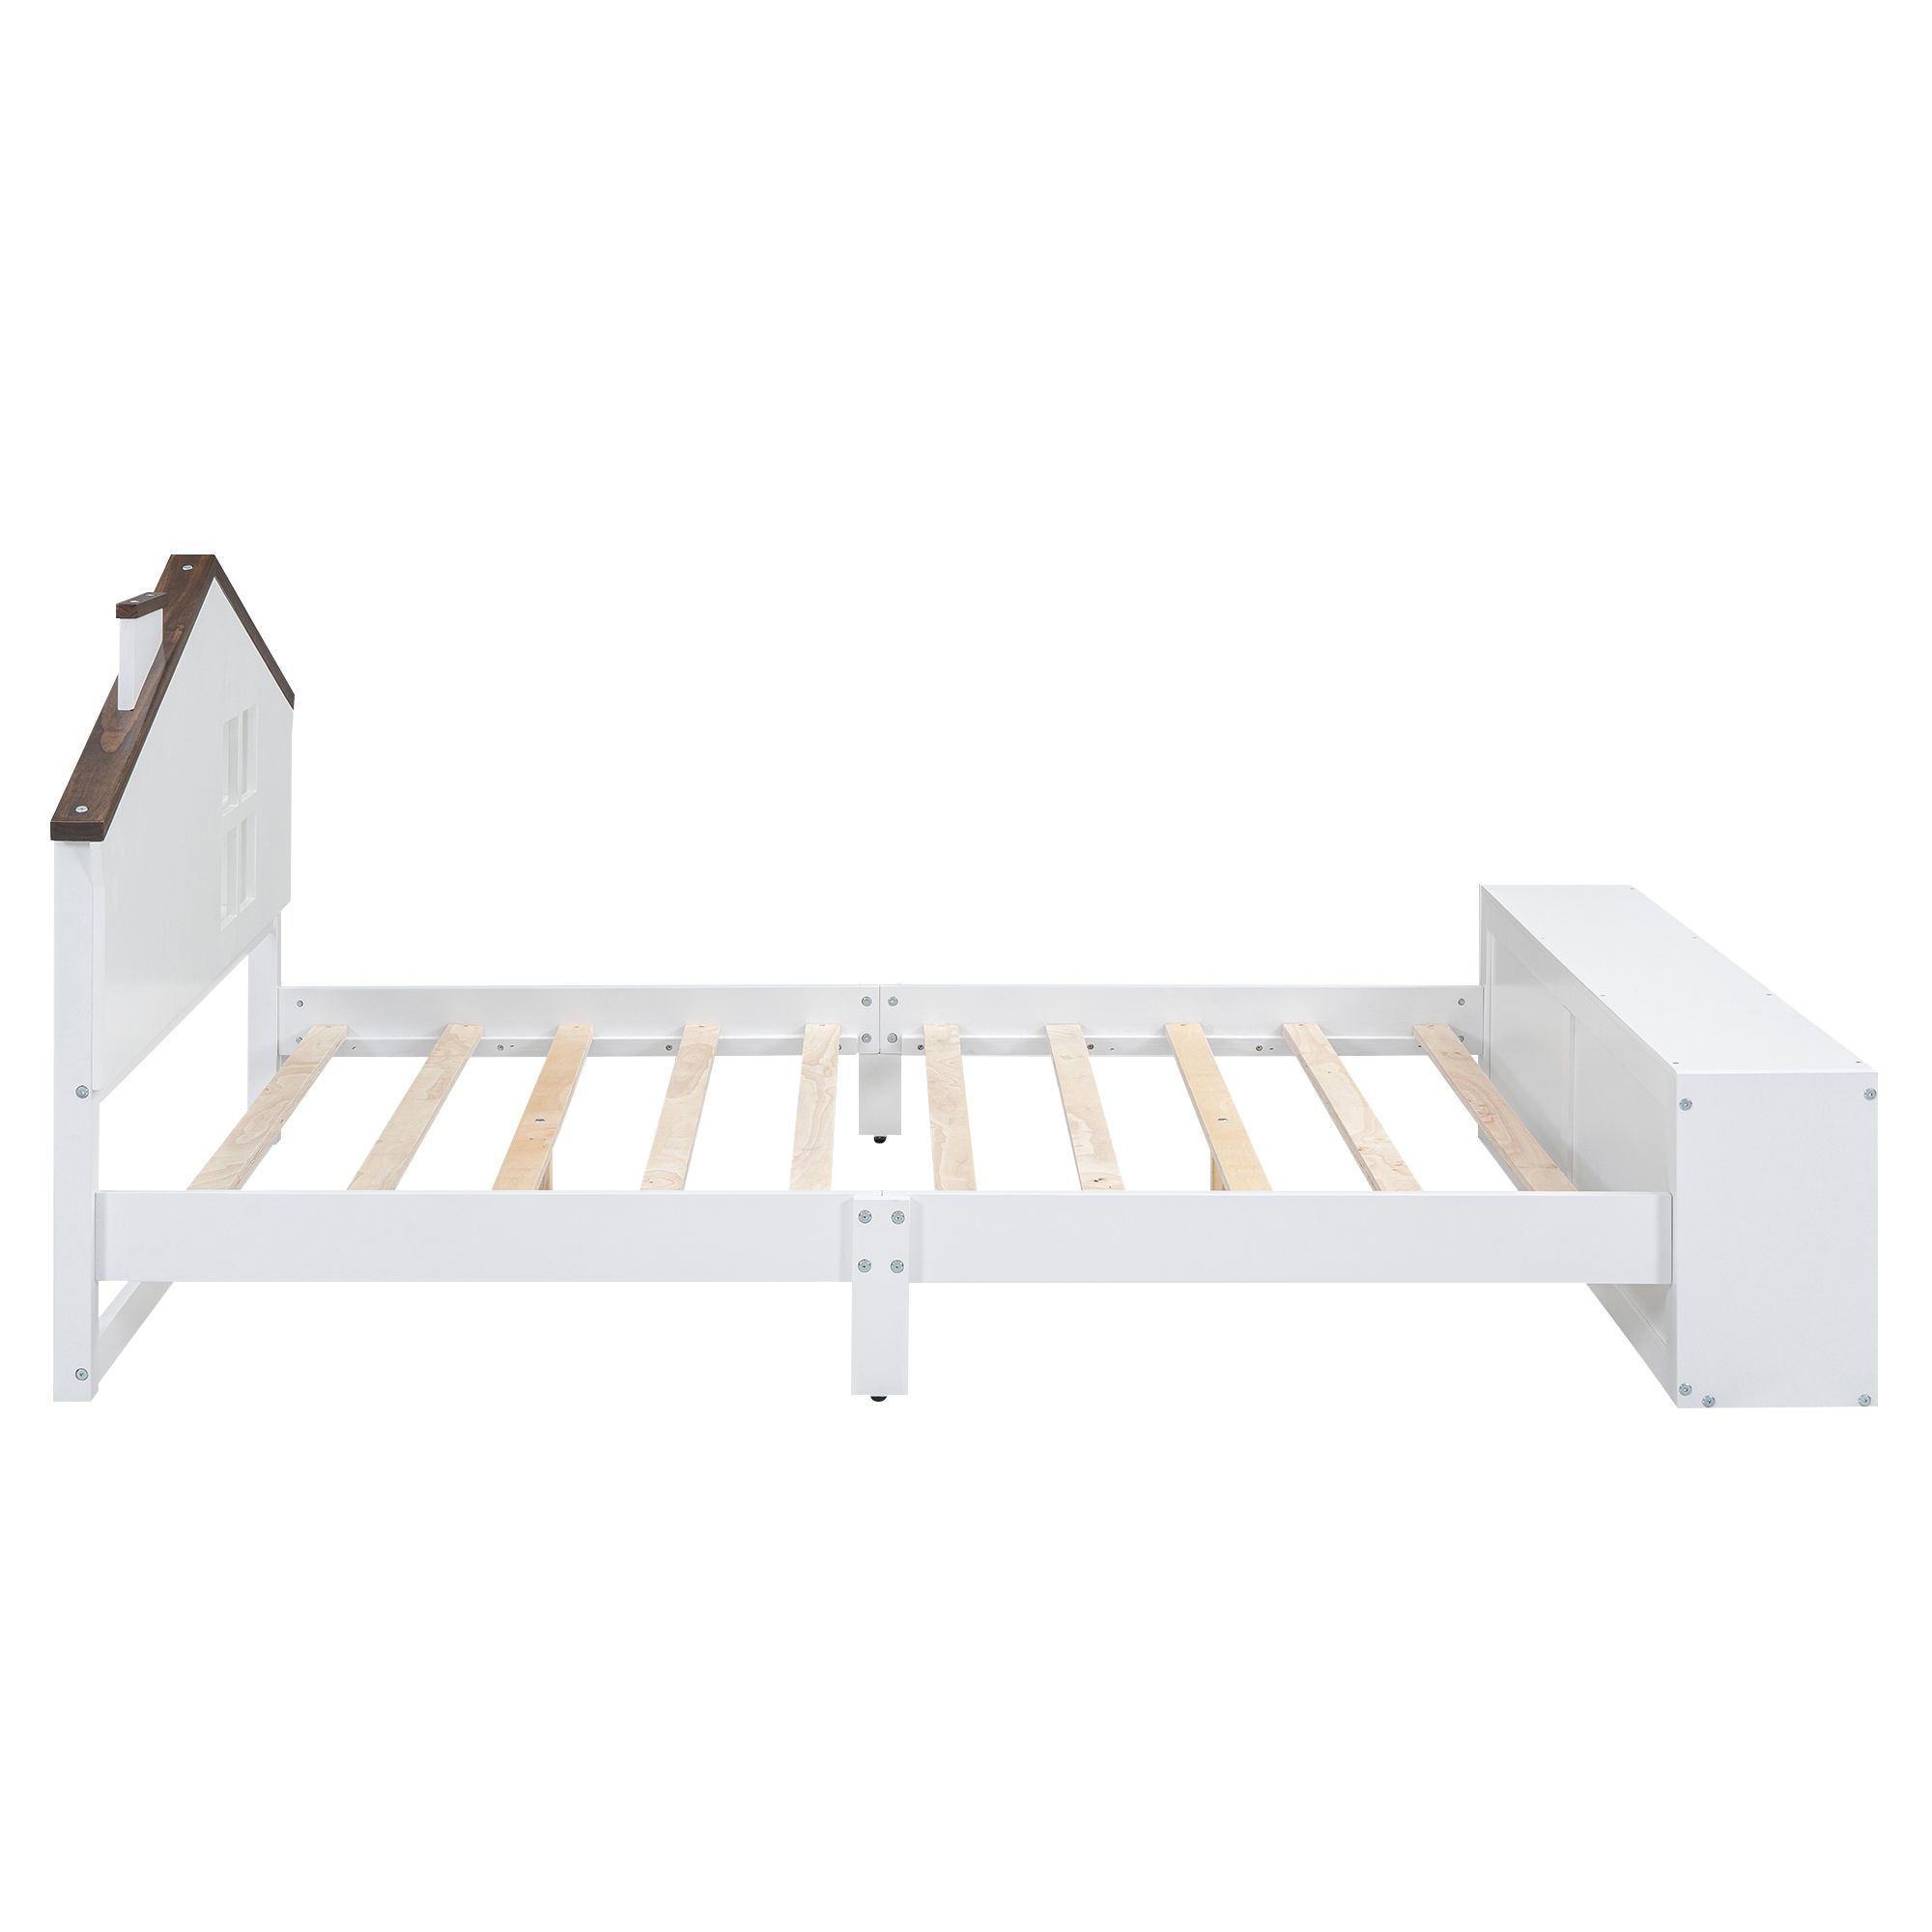 Nestfair Contemporary Full Size Platform Bed in White with LED Lights ...